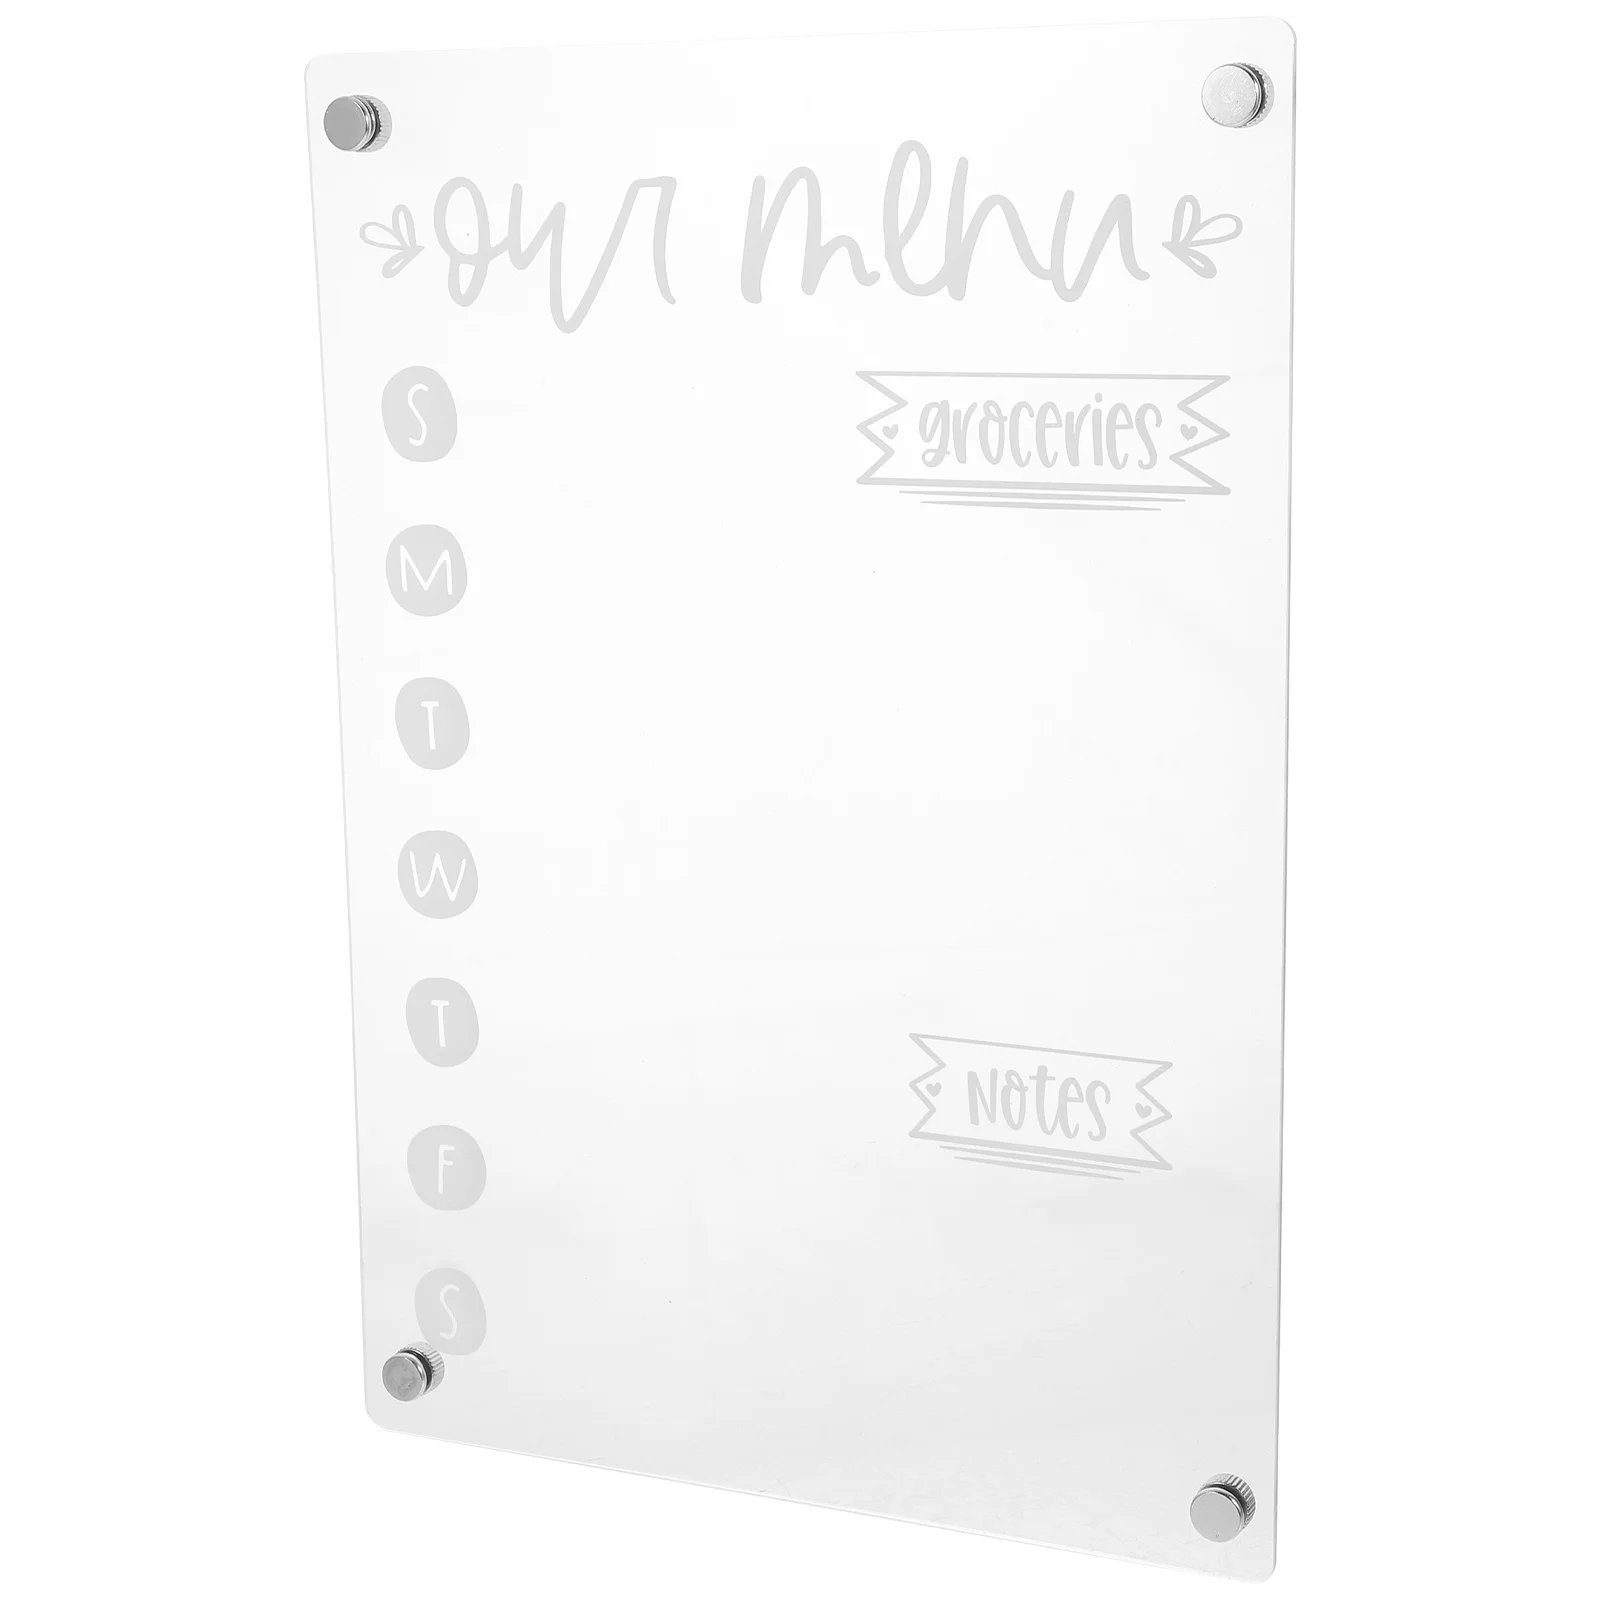 

Rewritable Message Board Clear Acrylic Dry Erase Fridge Magnetic Menu for Refrigerator Household Small Boards Meal